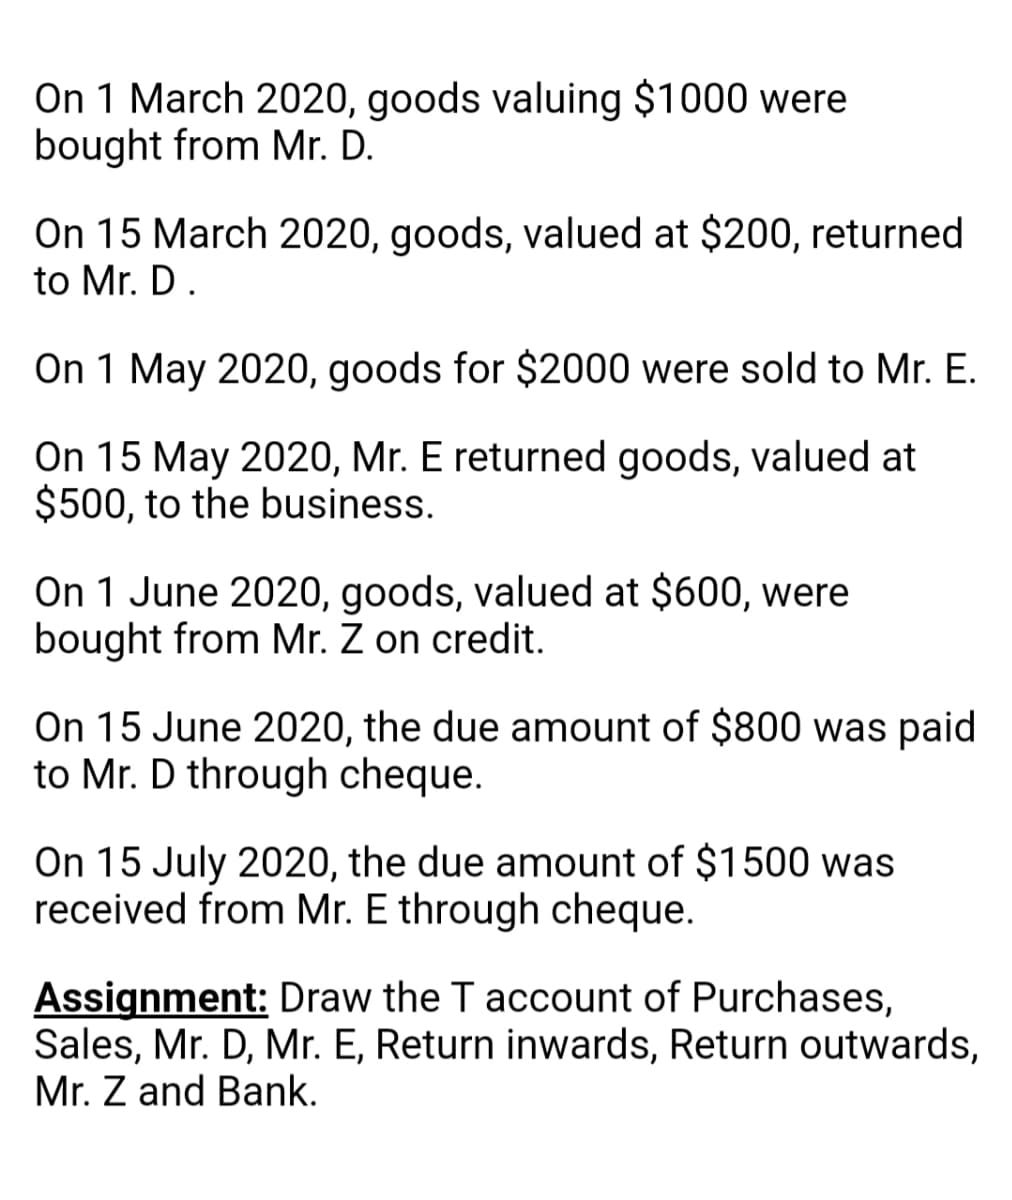 On 1 March 2020, goods valuing $1000 were
bought from Mr. D.
On 15 March 2020, goods, valued at $200, returned
to Mr. D.
On 1 May 2020, goods for $2000 were sold to Mr. E.
On 15 May 2020, Mr. E returned goods, valued at
$500, to the business.
On 1 June 2020, goods, valued at $600, were
bought from Mr. Z on credit.
On 15 June 2020, the due amount of $800 was paid
to Mr. D through cheque.
On 15 July 2020, the due amount of $1500 was
received from Mr. E through cheque.
Assignment: Draw the T account of Purchases,
Sales, Mr. D, Mr. E, Return inwards, Return outwards,
Mr. Z and Bank.
